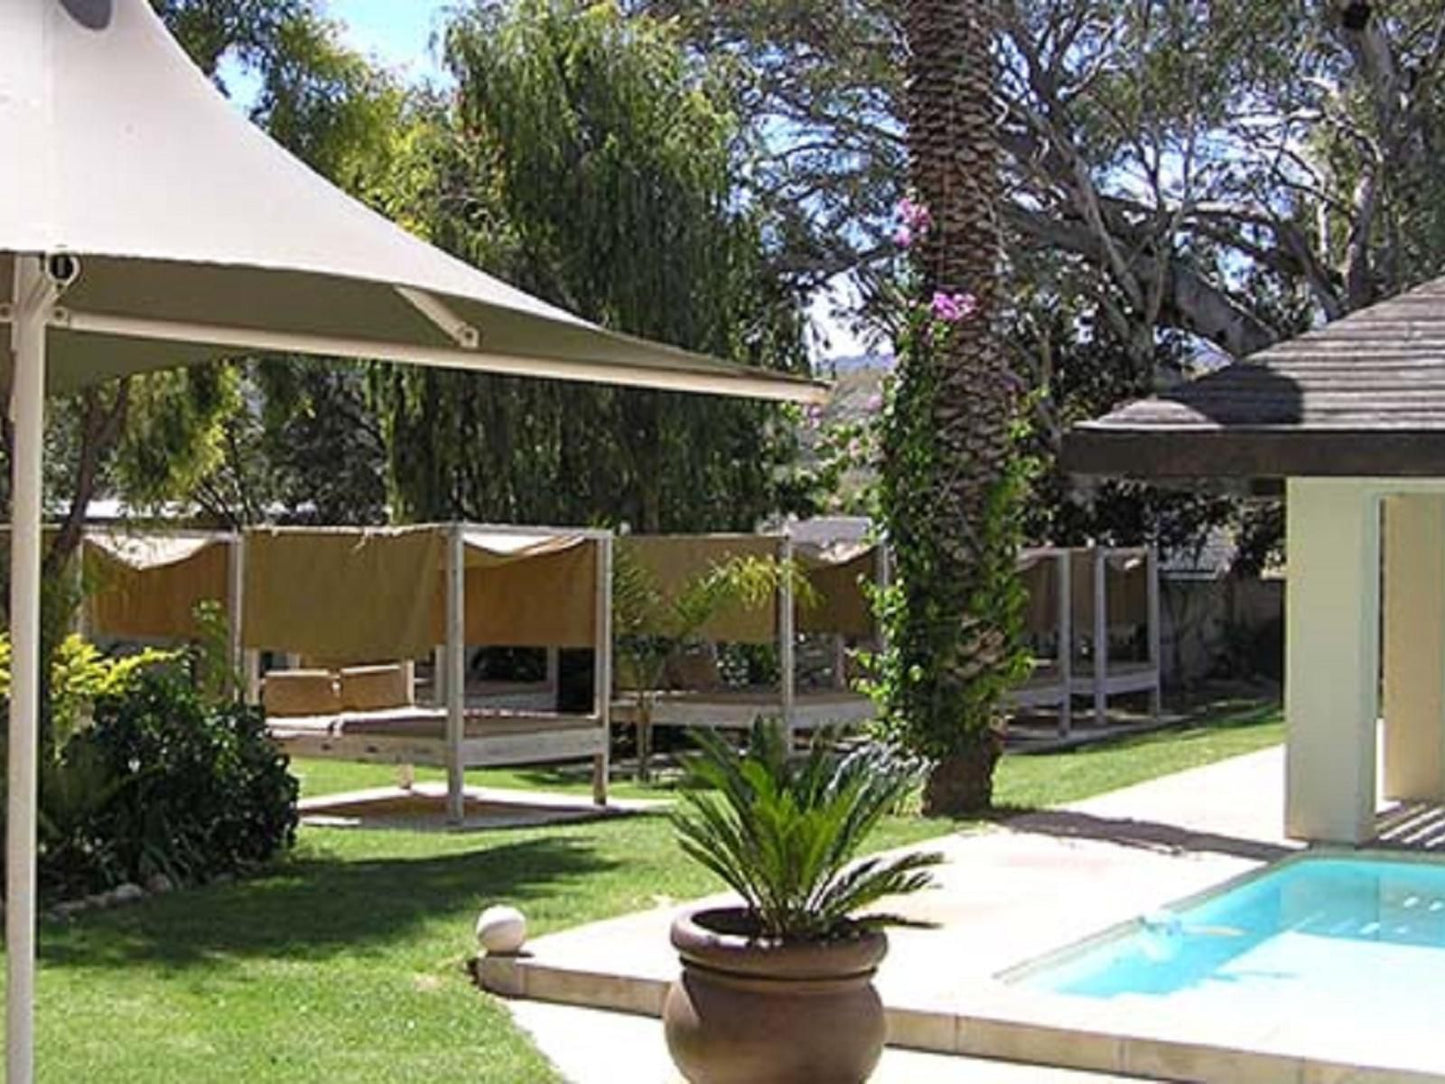 Clanwilliam Lodge Clanwilliam Western Cape South Africa Palm Tree, Plant, Nature, Wood, Garden, Swimming Pool